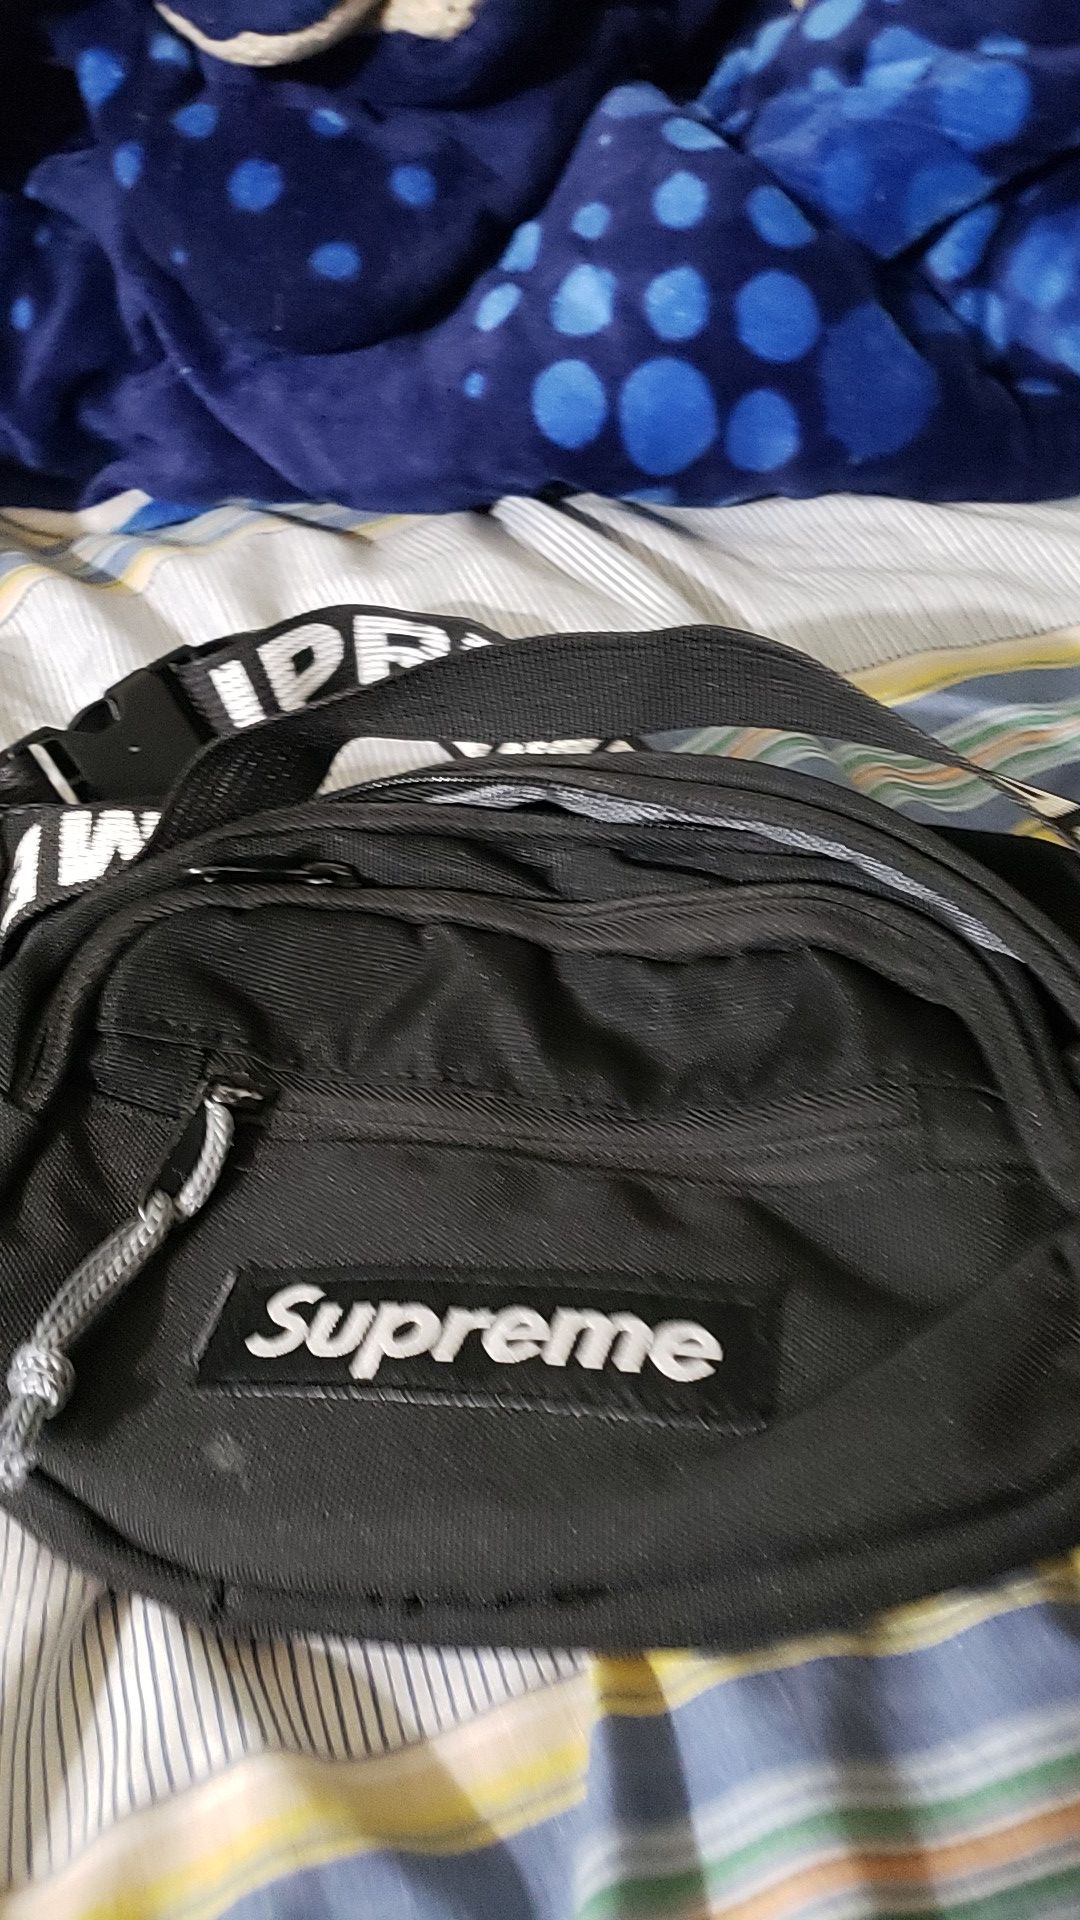 Supreme fanny pack also trading